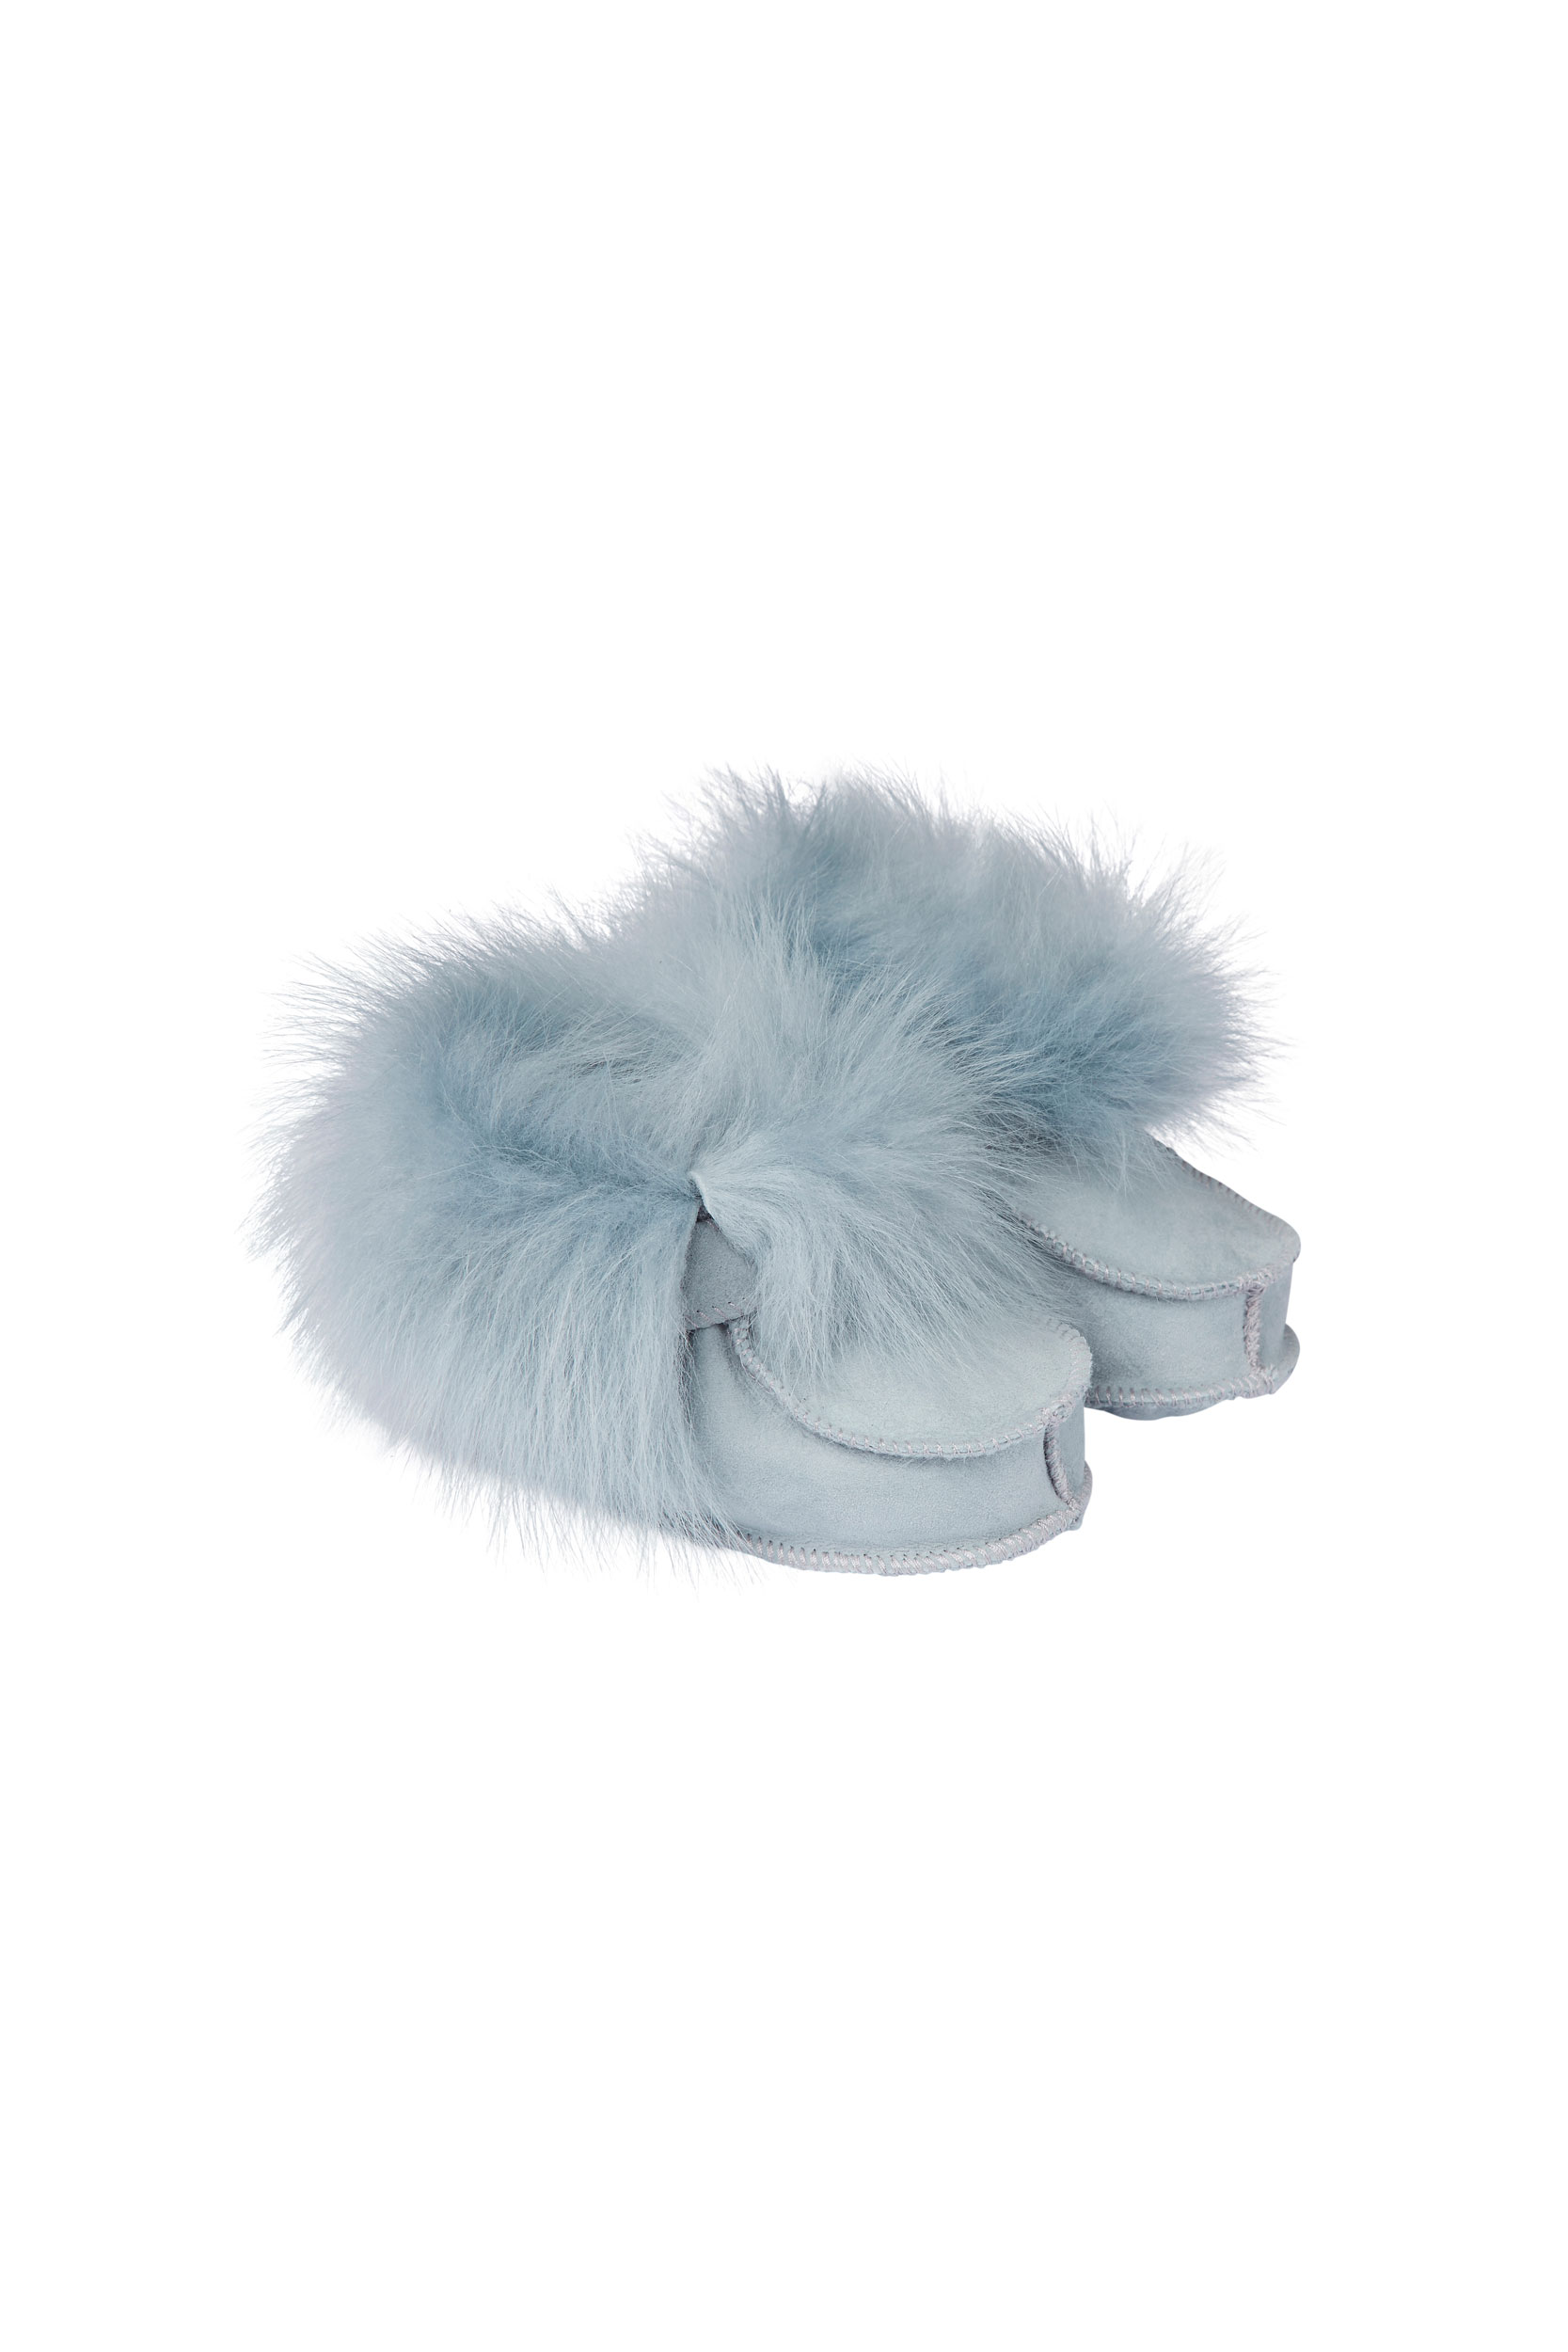 Blue Shearling Baby Boots | Children | Gushlow and Cole